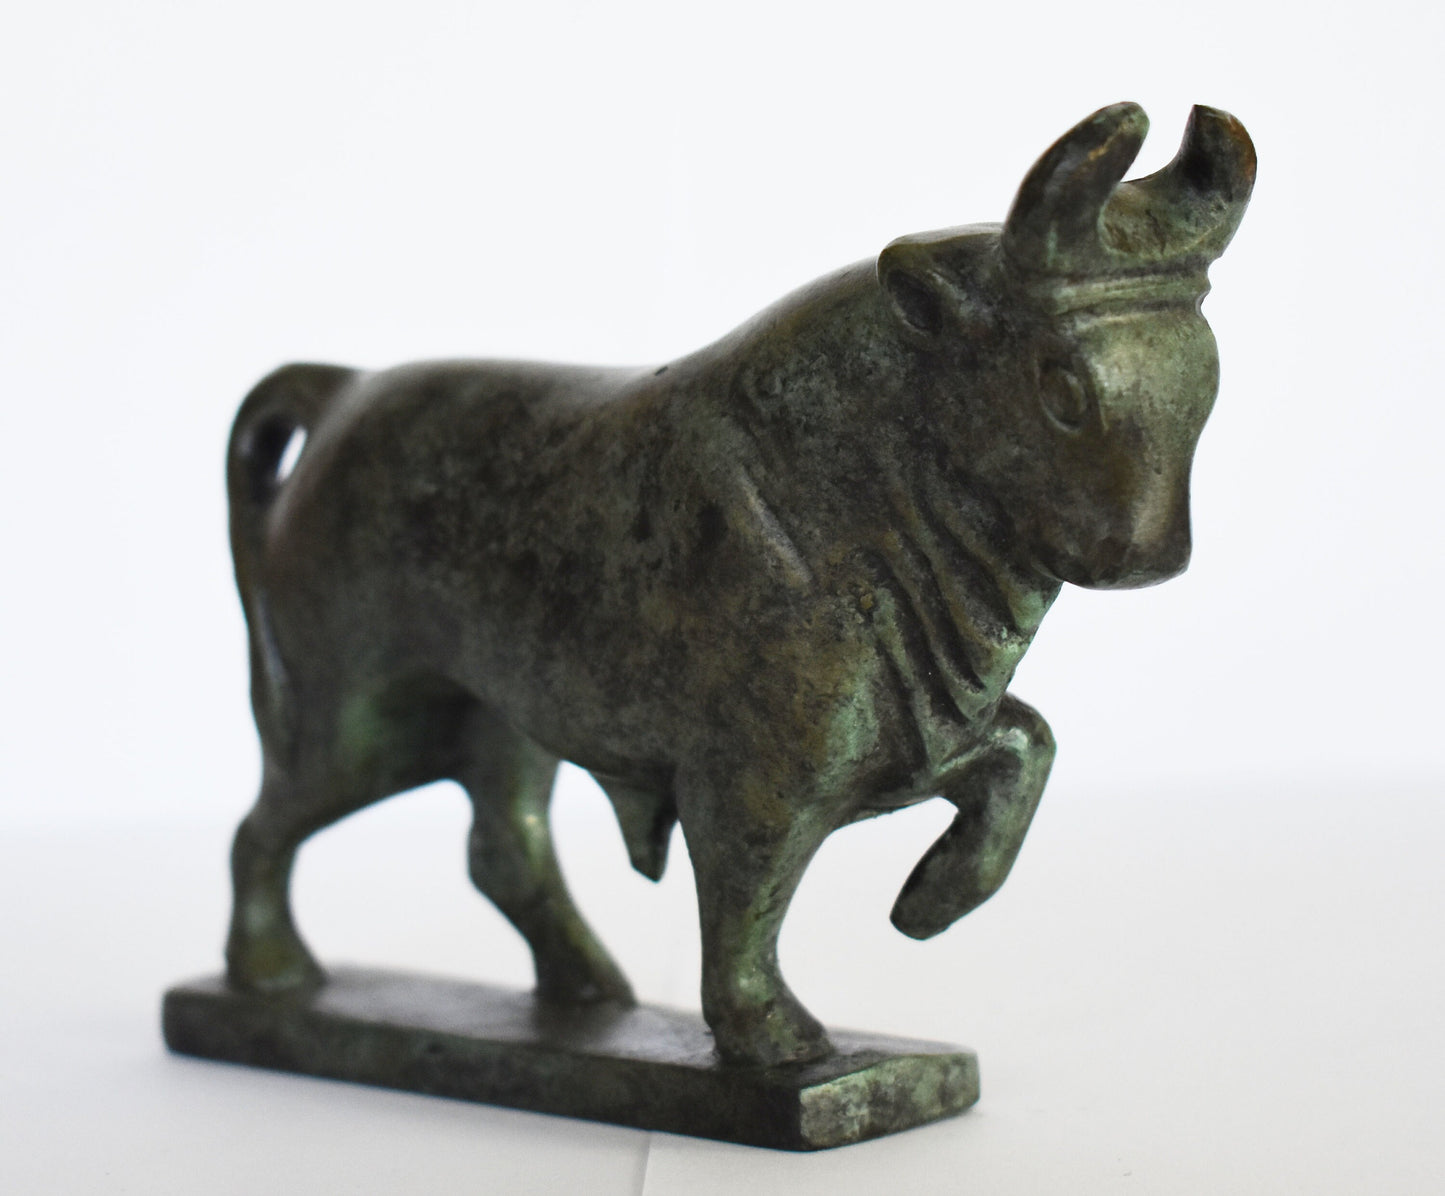 Minoan Bull - Knossos Palace - Crete - Symbol of Cosmic Energy, Forces of Life and Death, Pillars of the universe -Small -Pure Bronze Statue